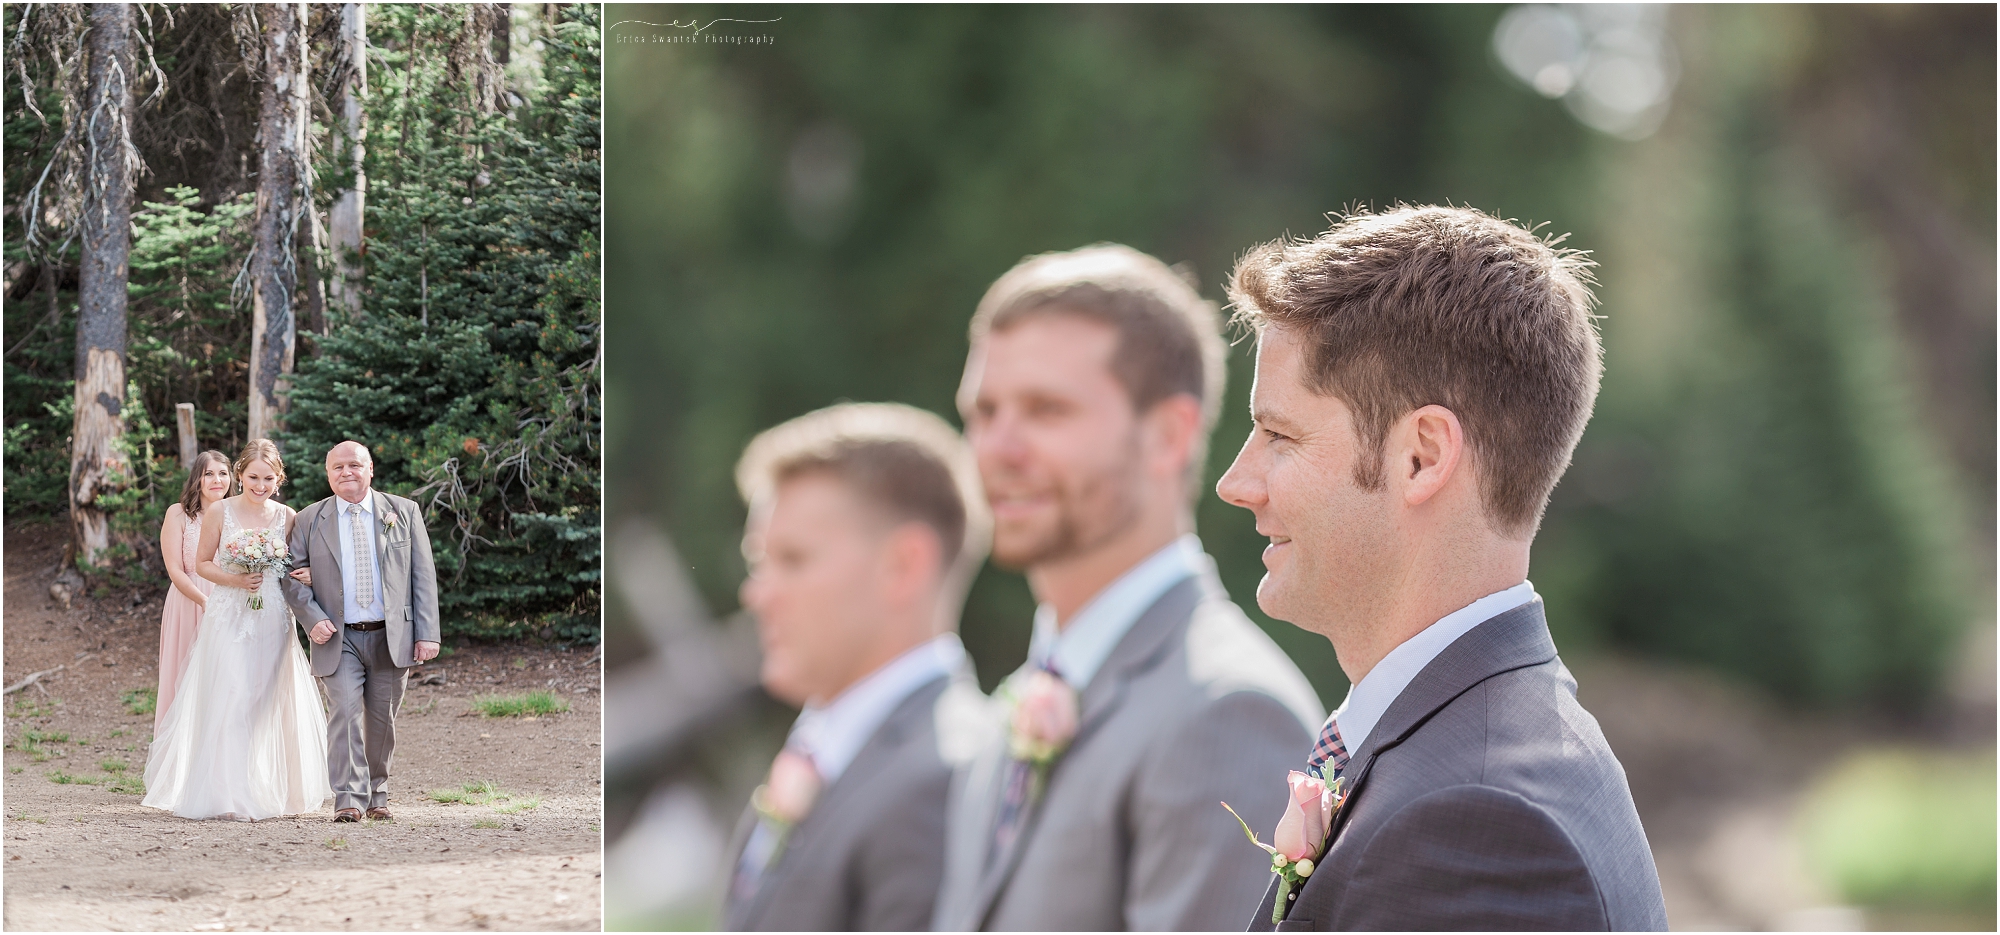 A gorgeous intimate outdoor Oregon wedding near Bend, OR for a destination couple. 